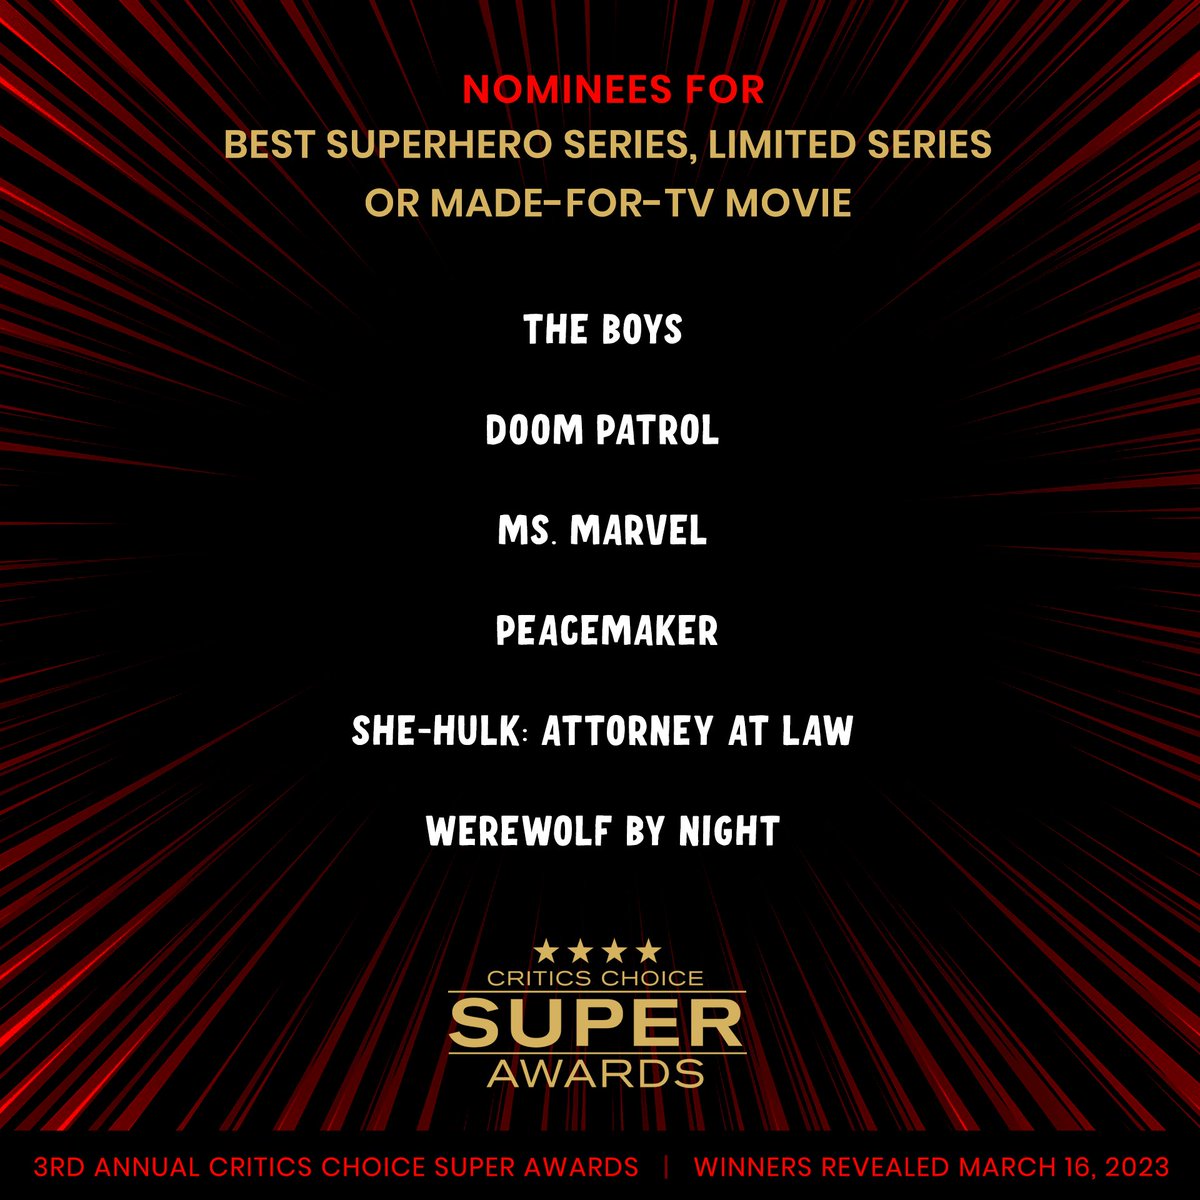 Congratulations to #CriticsChoice #SuperAwards Nominees for BEST SUPERHERO SERIES, LIMITED SERIES OR MADE-FOR-TV MOVIE:
@TheBoysTV @DCDoomPatrol @msmarvel @DCpeacemaker @SheHulkOfficial #werewolfbynight 

Full list: criticschoice.com